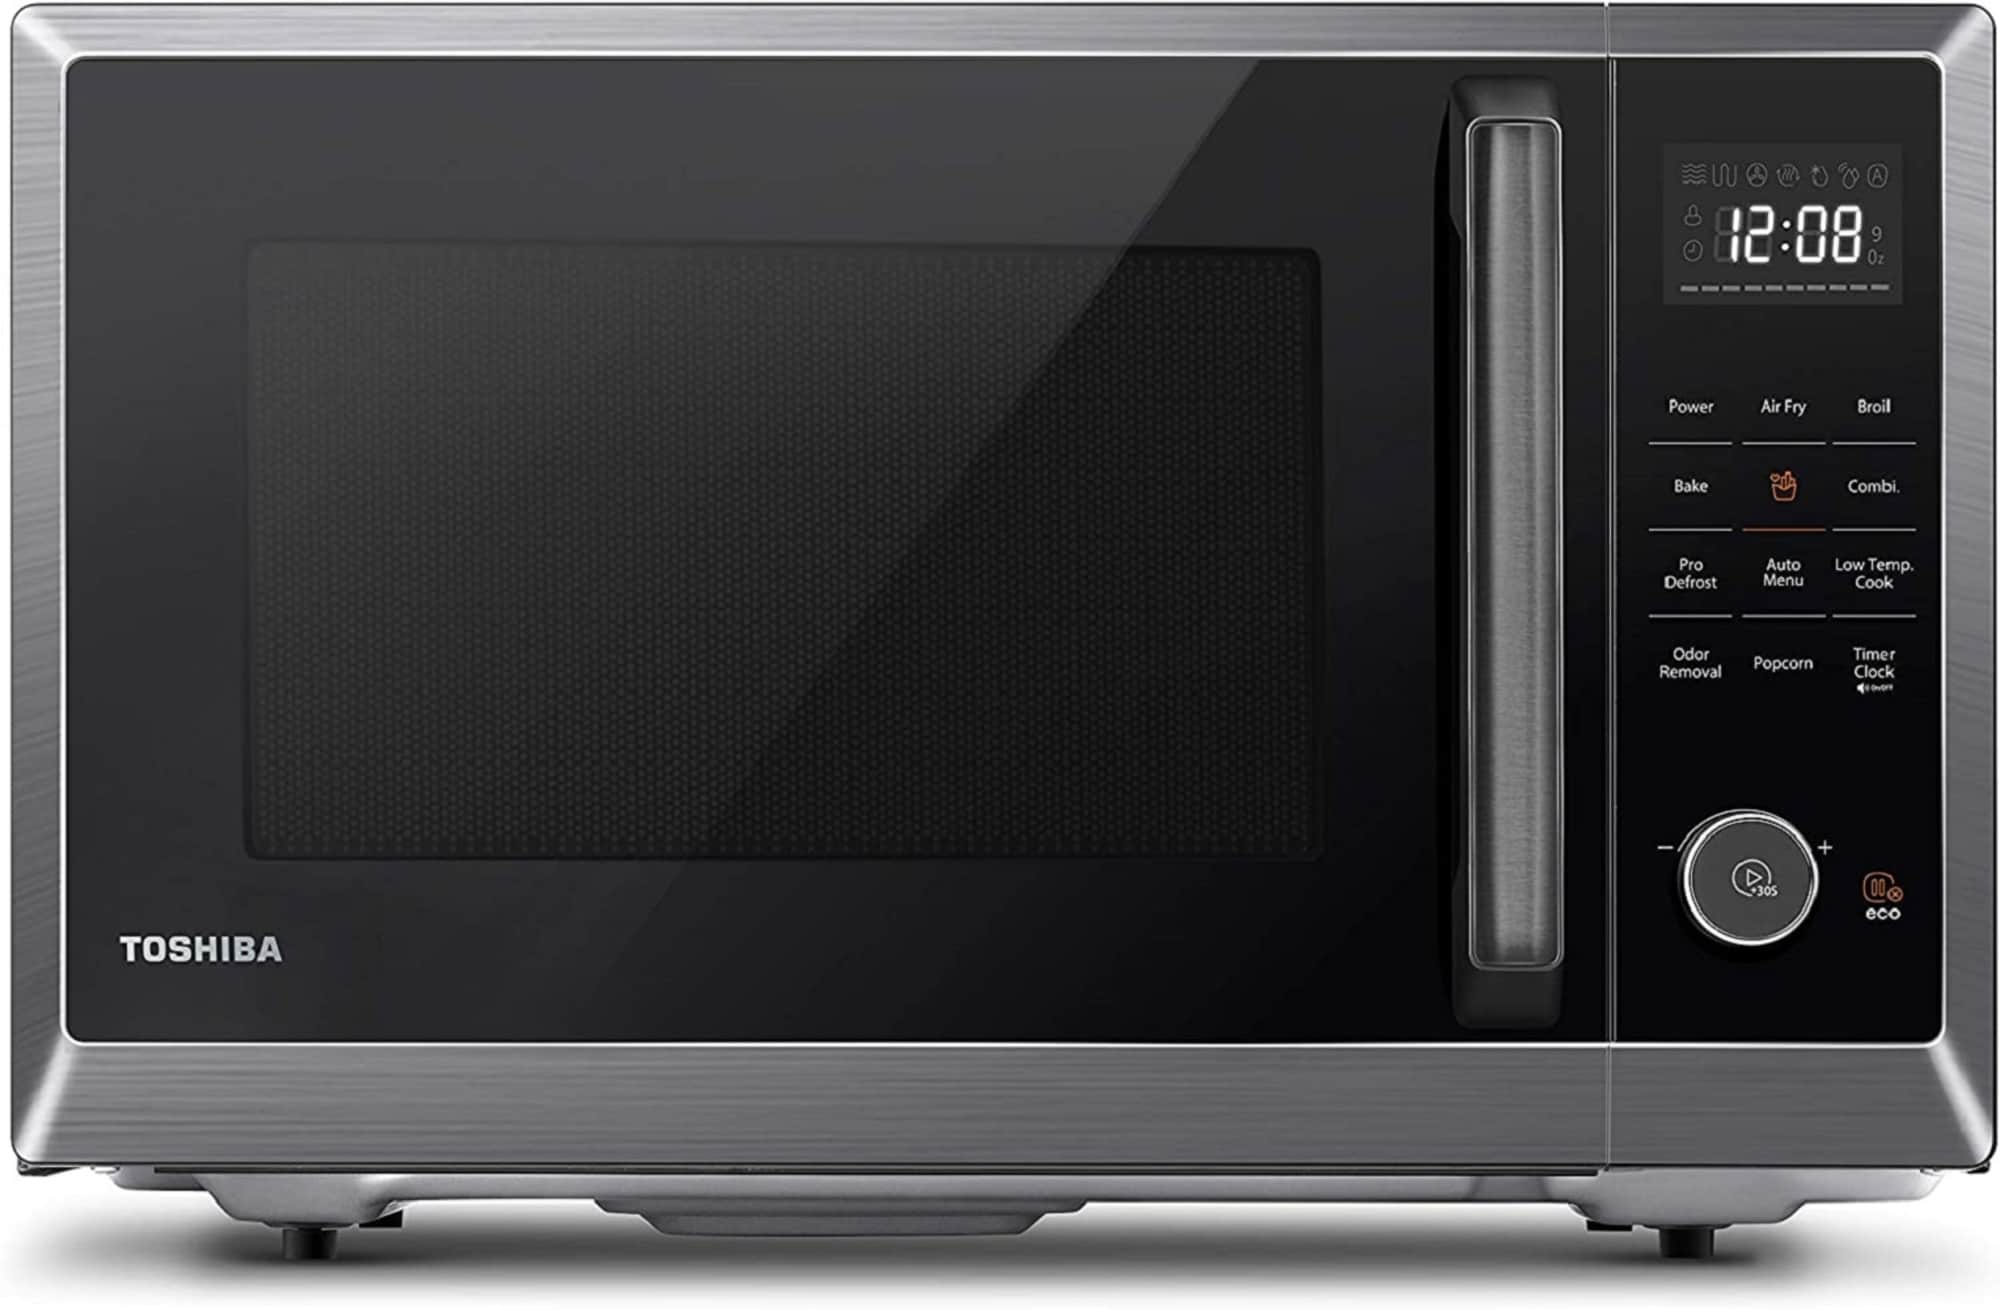 Toshiba 1.2 Cubic Feet Convection Countertop Microwave with Sensor Cooking  and Air Frying Capability